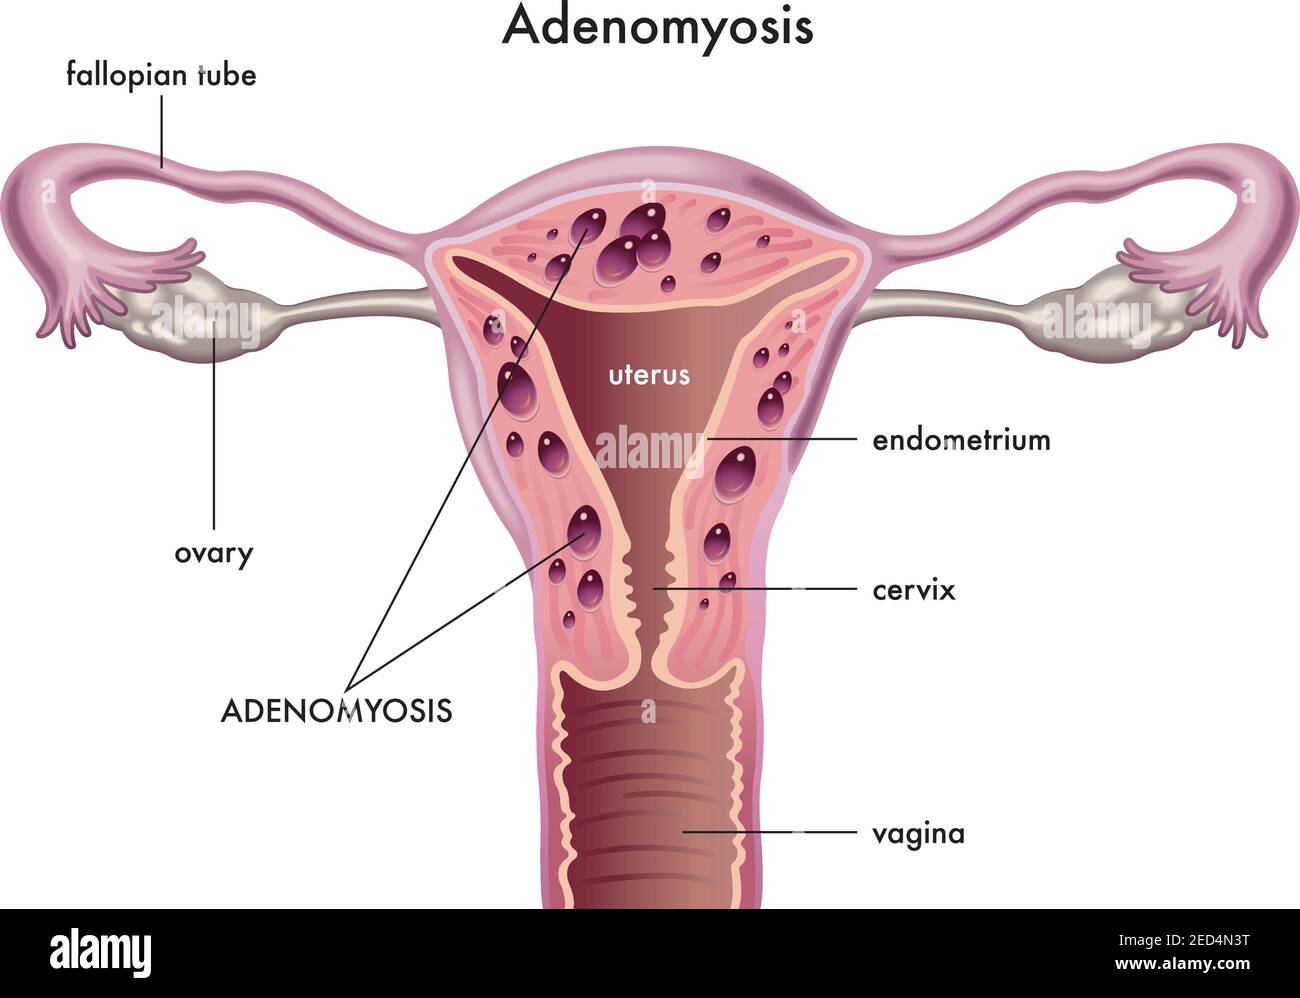 Anatomical illustration of the female reproductive system with the symptoms of adenomyosis, with annotations. Stock Vector